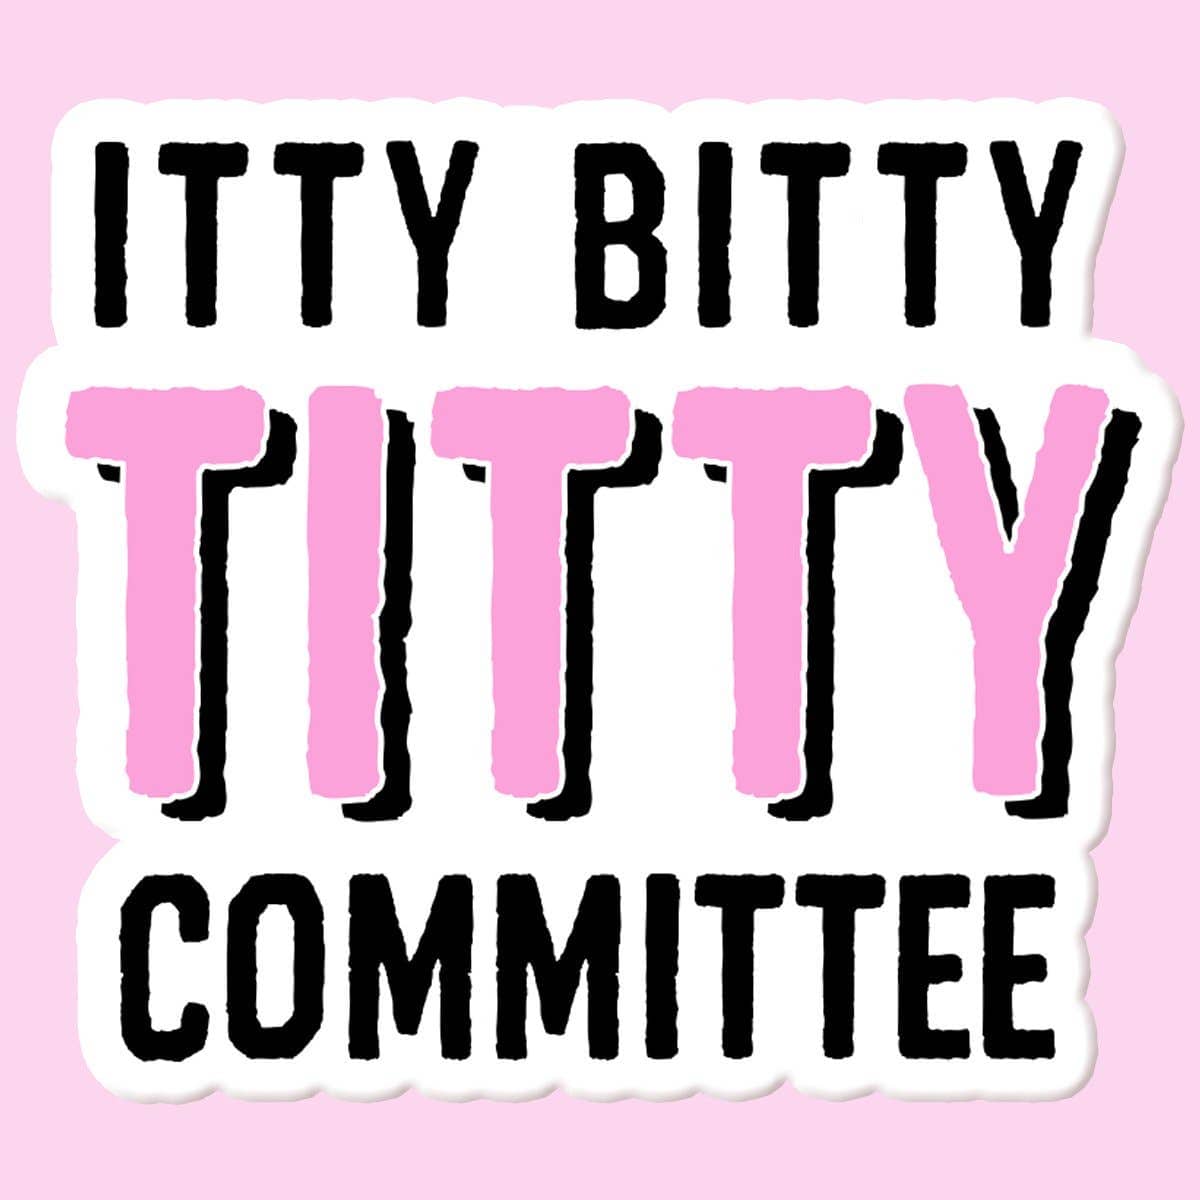 Mugsby Itty Bitty Titty Committee Sticker Decal